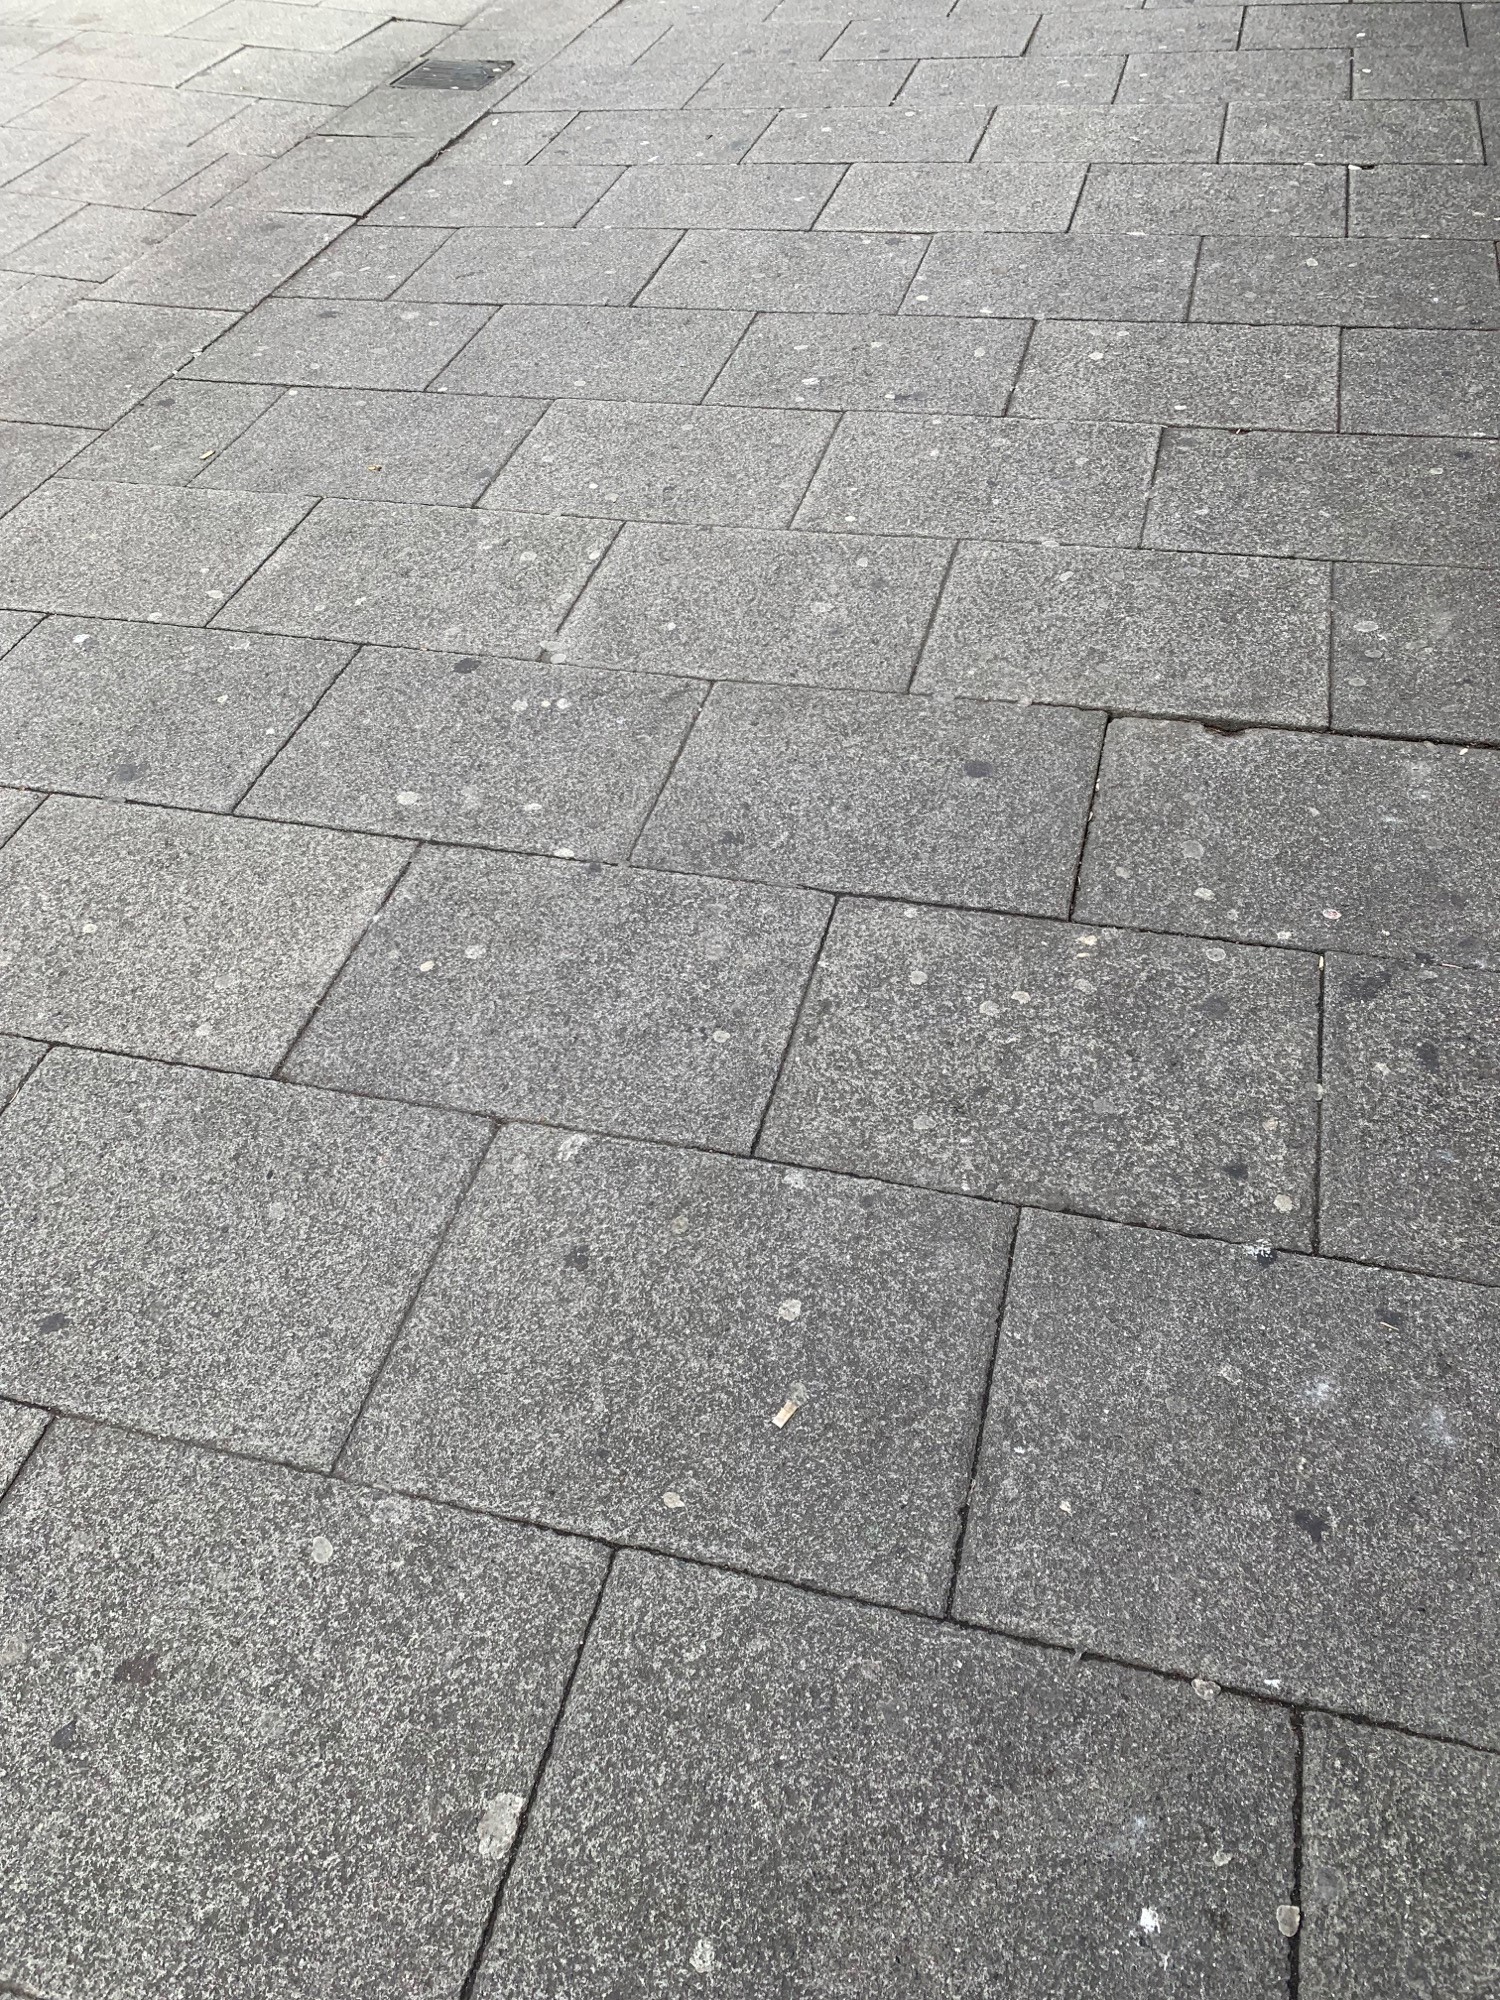 Stained street caused by chewing gum